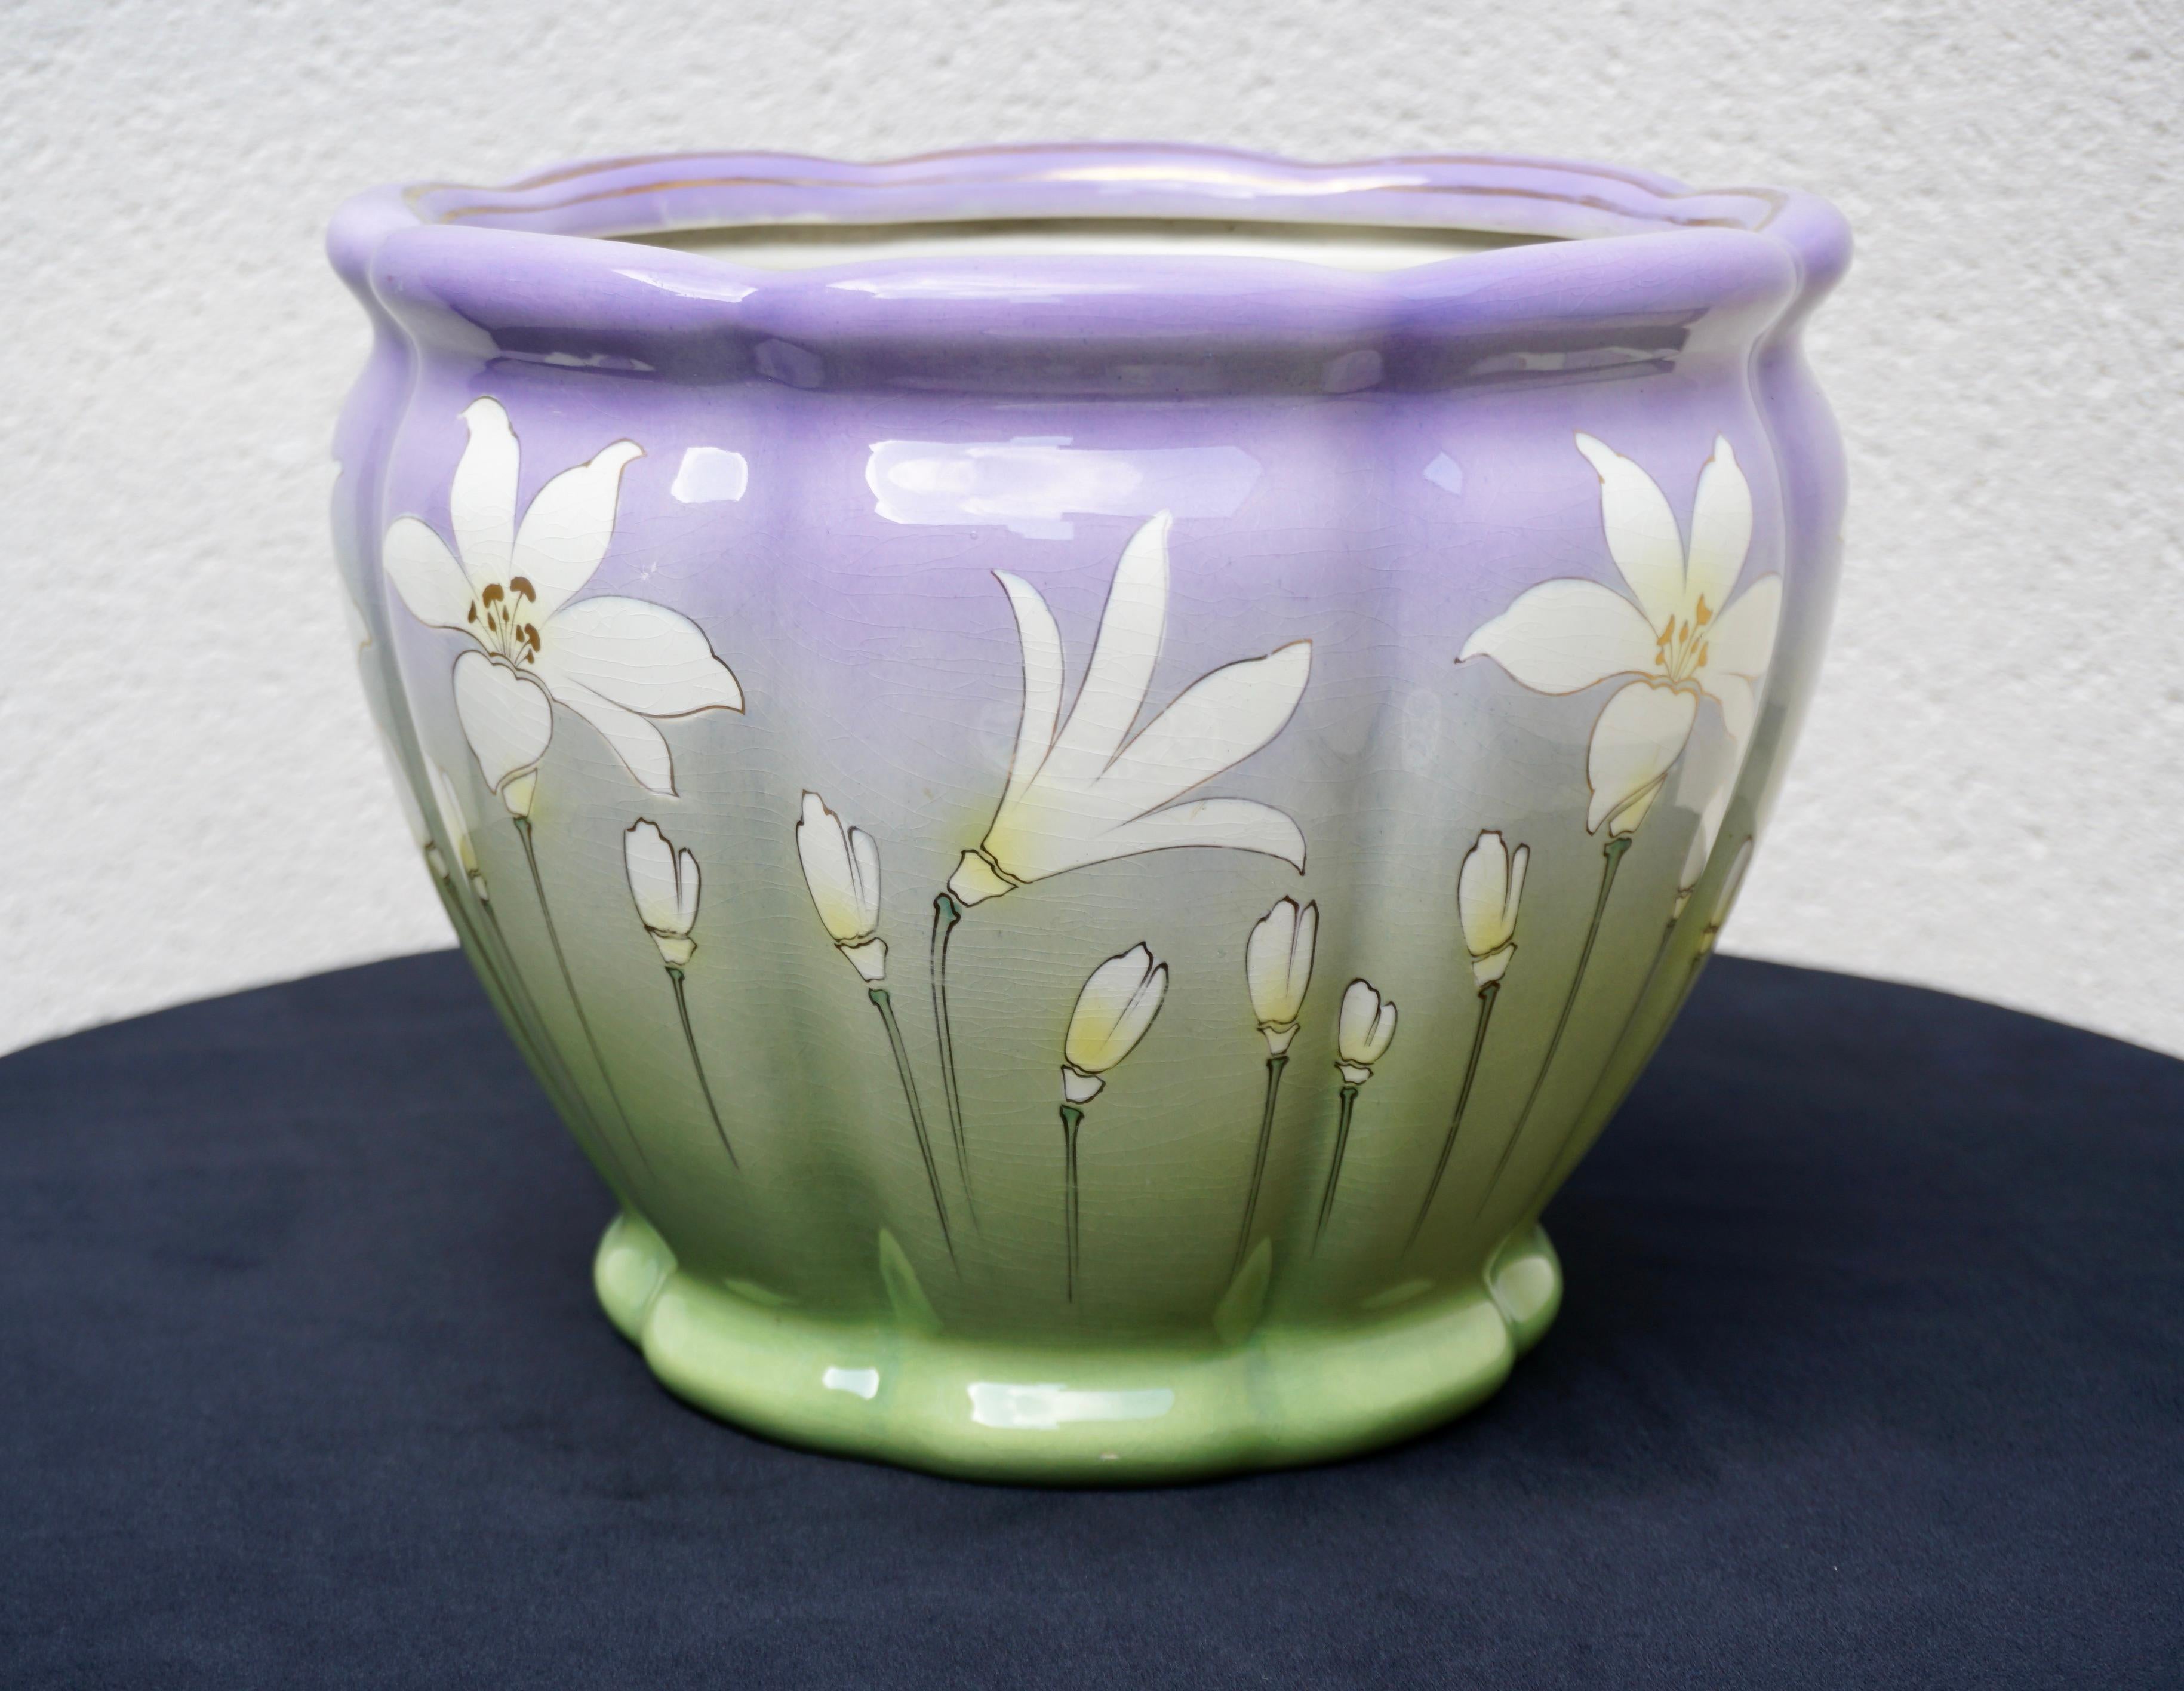 An France ceramic purple lilac and green flower or plant pot holder cachepot jardiniere planter with white flowers, circa early-20th century, France. Great as a standalone piece or to add with other planters' cachepots. 
  
Dimensions: 711.4